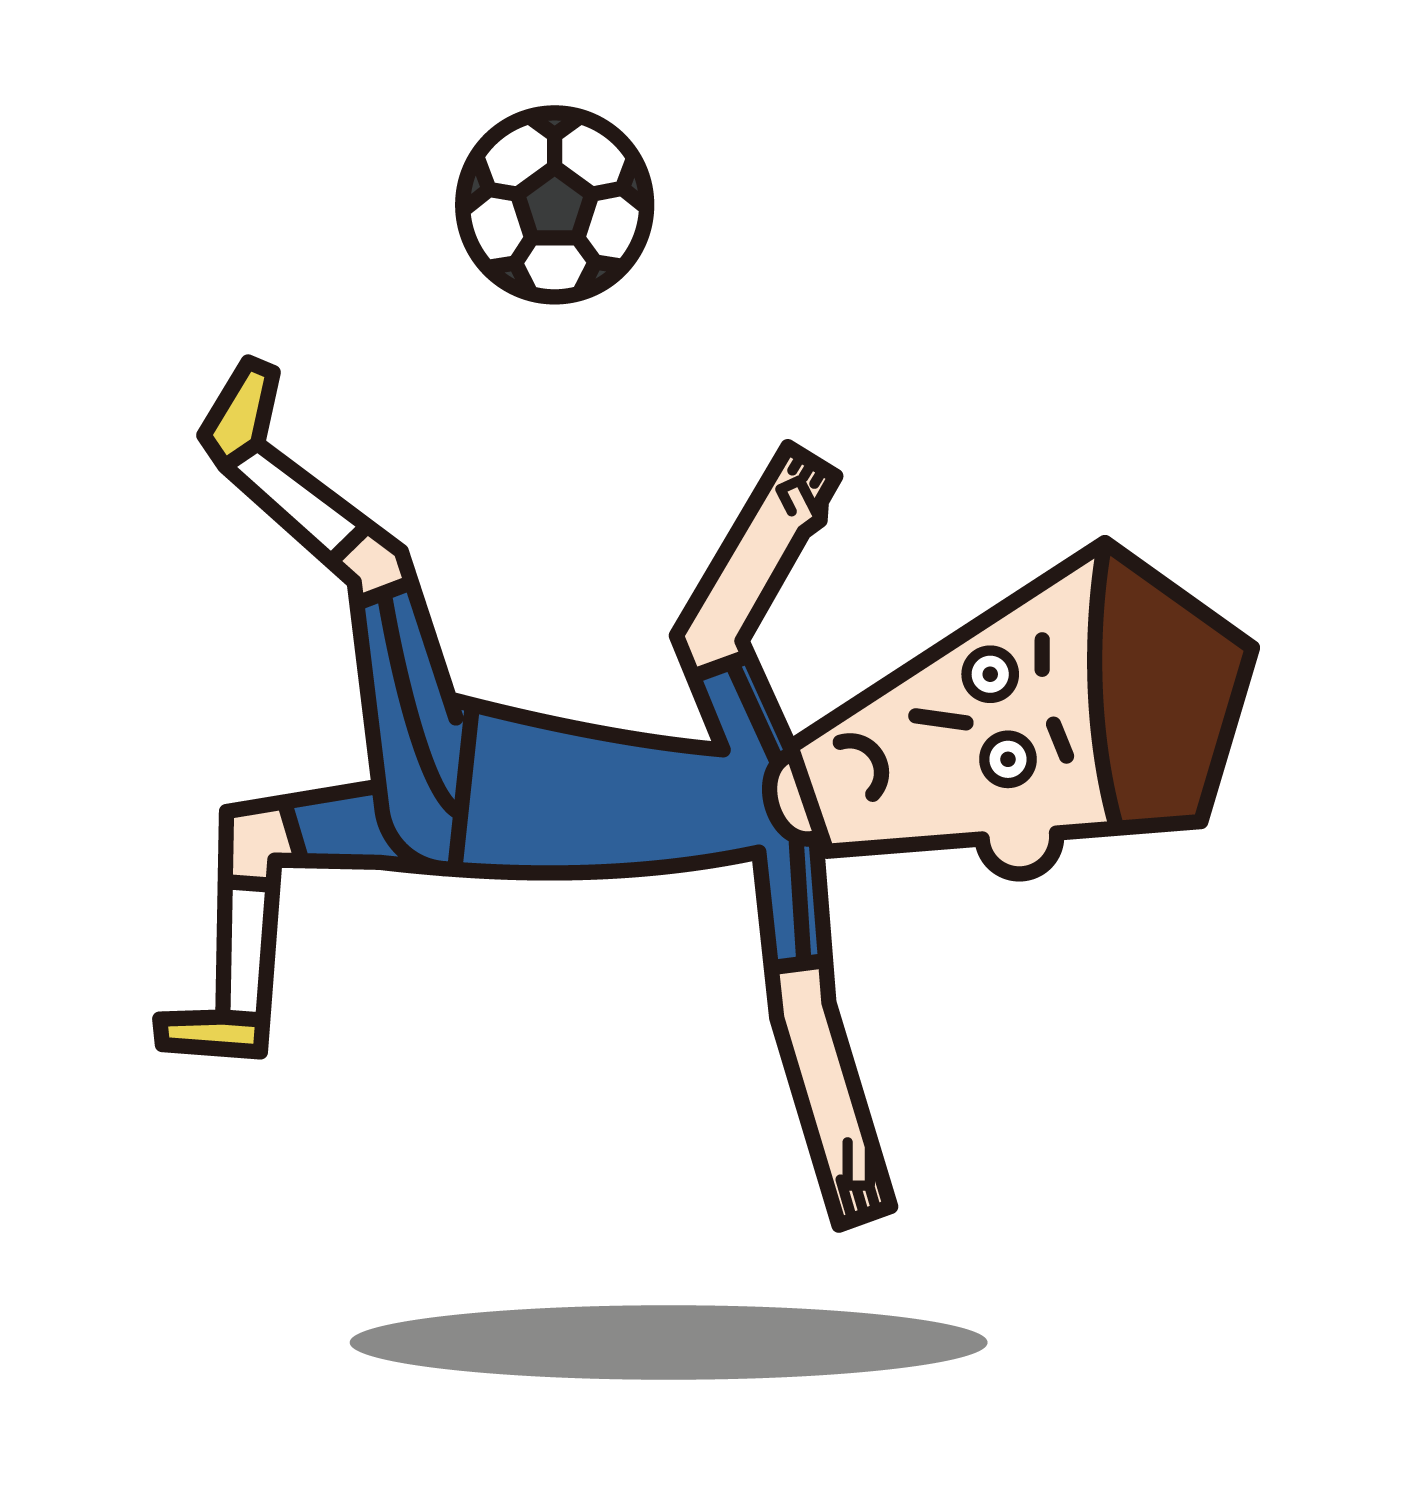 Illustration of a male soccer player doing an overhead kick